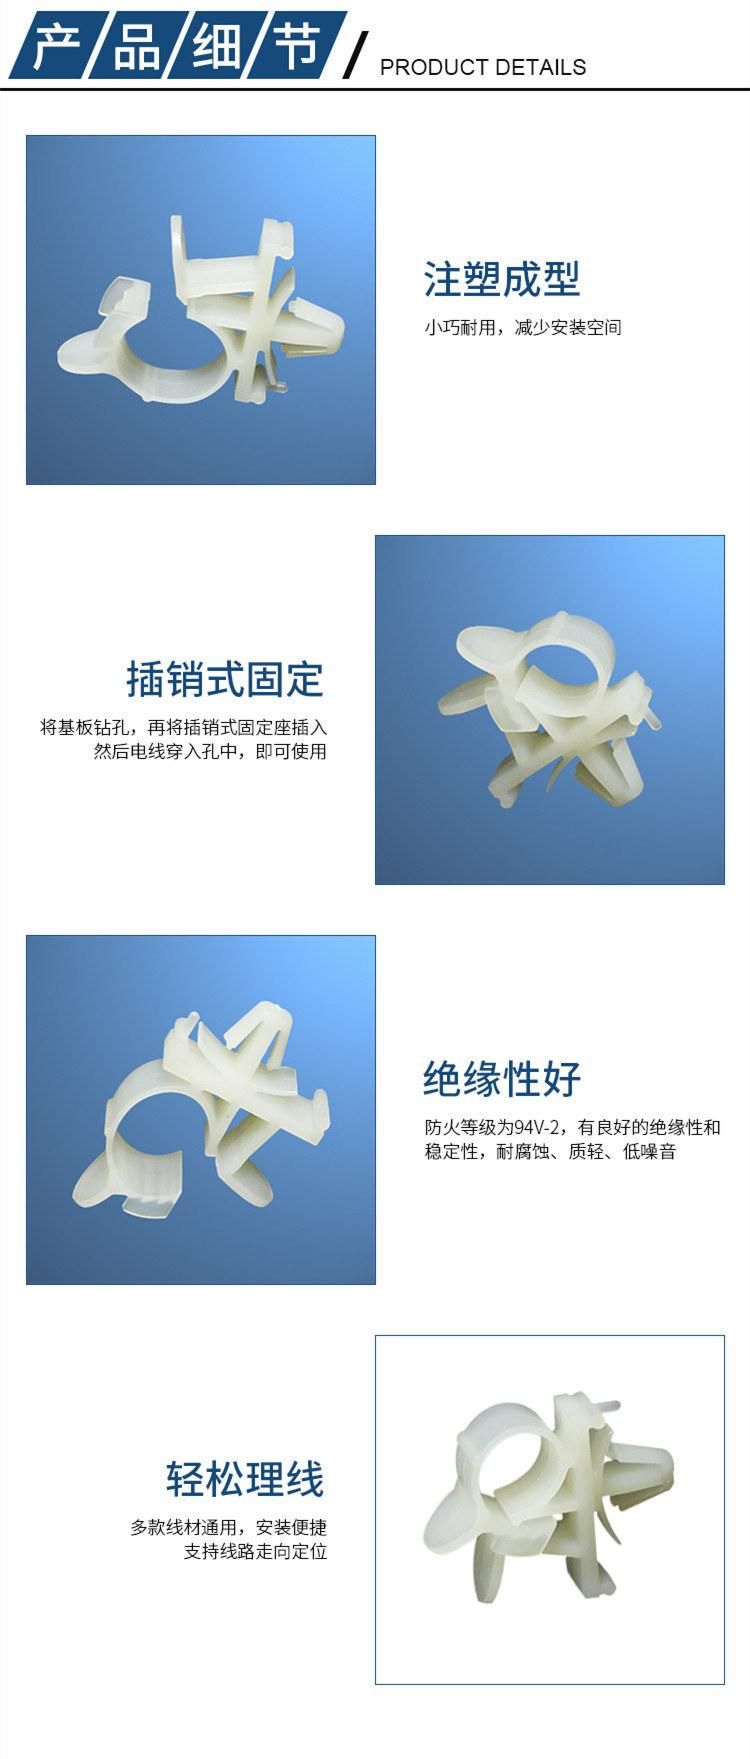 Plastic Cable Fasten Saddle Wire Routing Positioning, Heyingcn Plastic Injection Clip Buckle Nylon Wire Clip